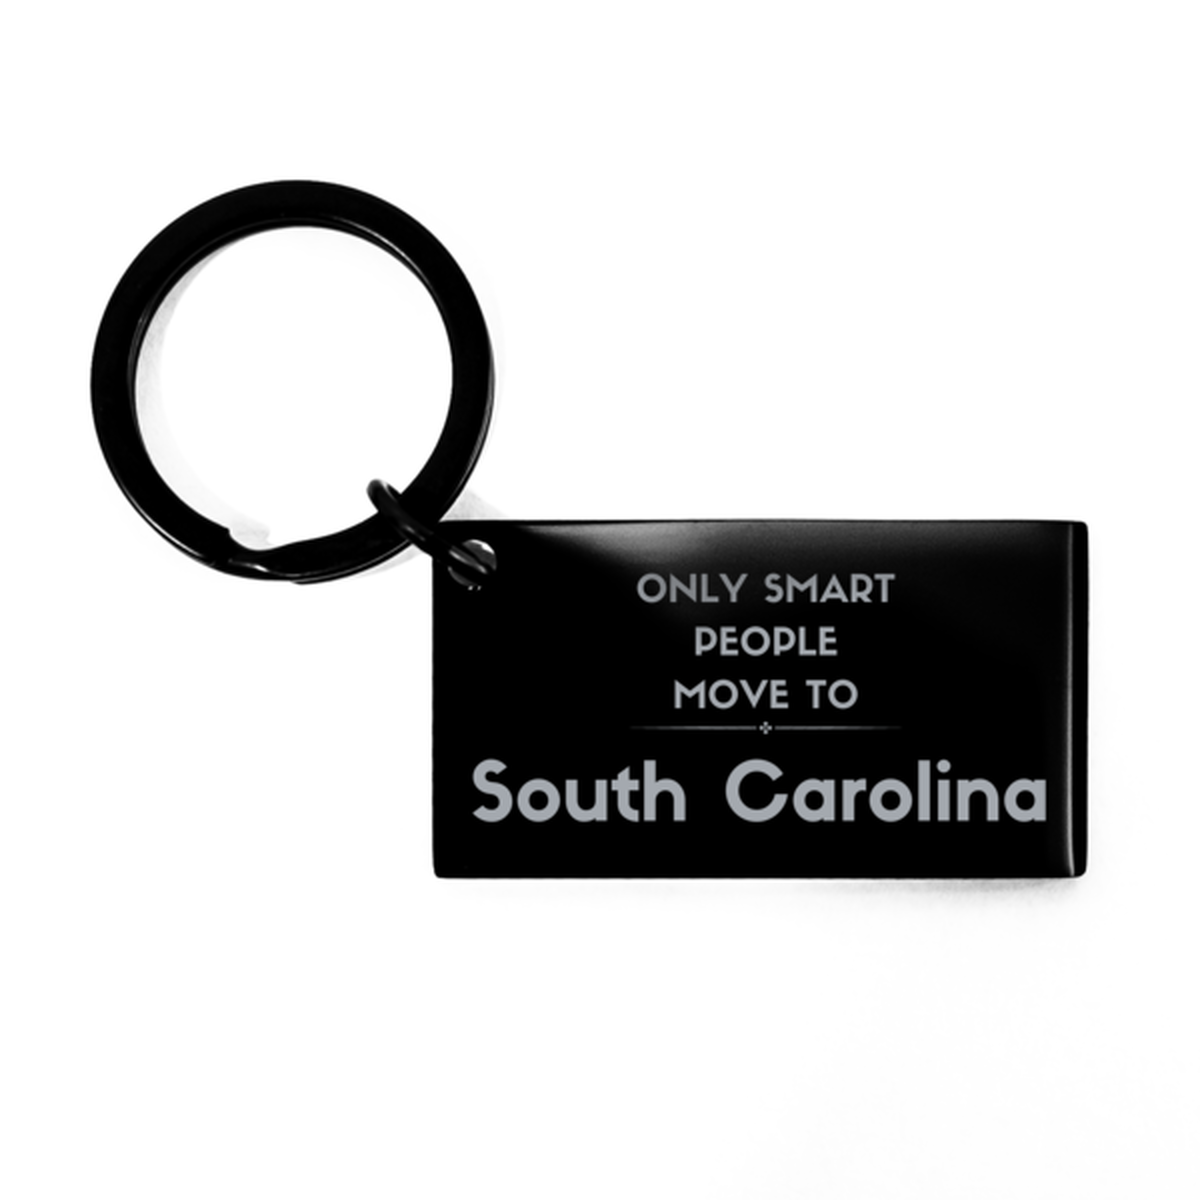 Only smart people move to South Carolina Keychain, Gag Gifts For South Carolina, Move to South Carolina Gifts for Friends Coworker Funny Saying Quote